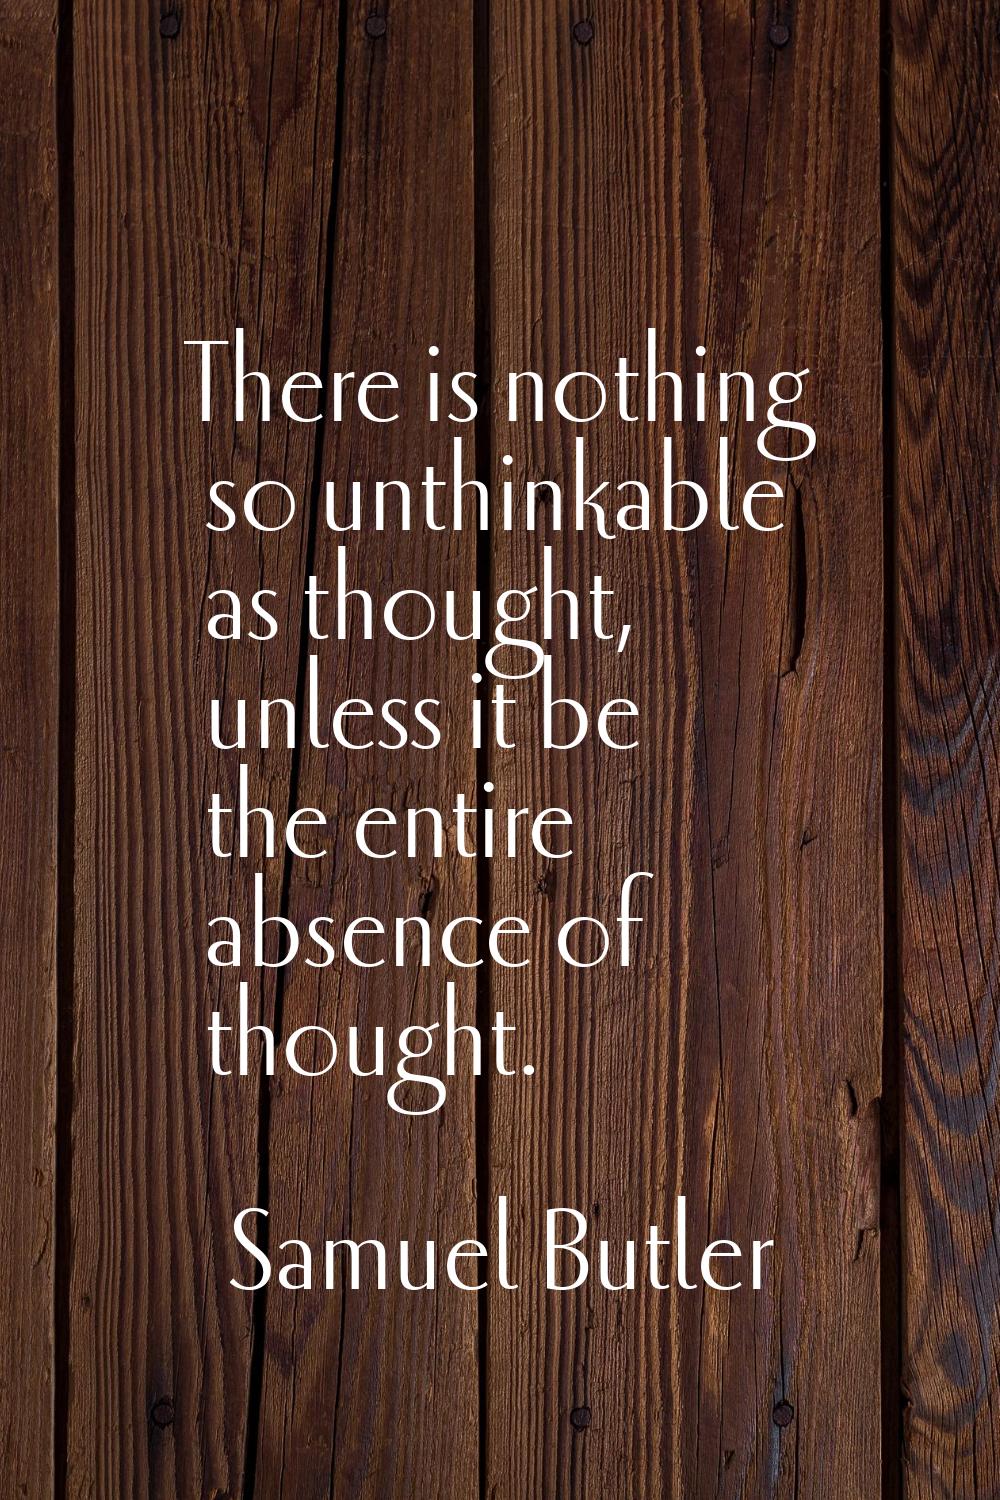 There is nothing so unthinkable as thought, unless it be the entire absence of thought.